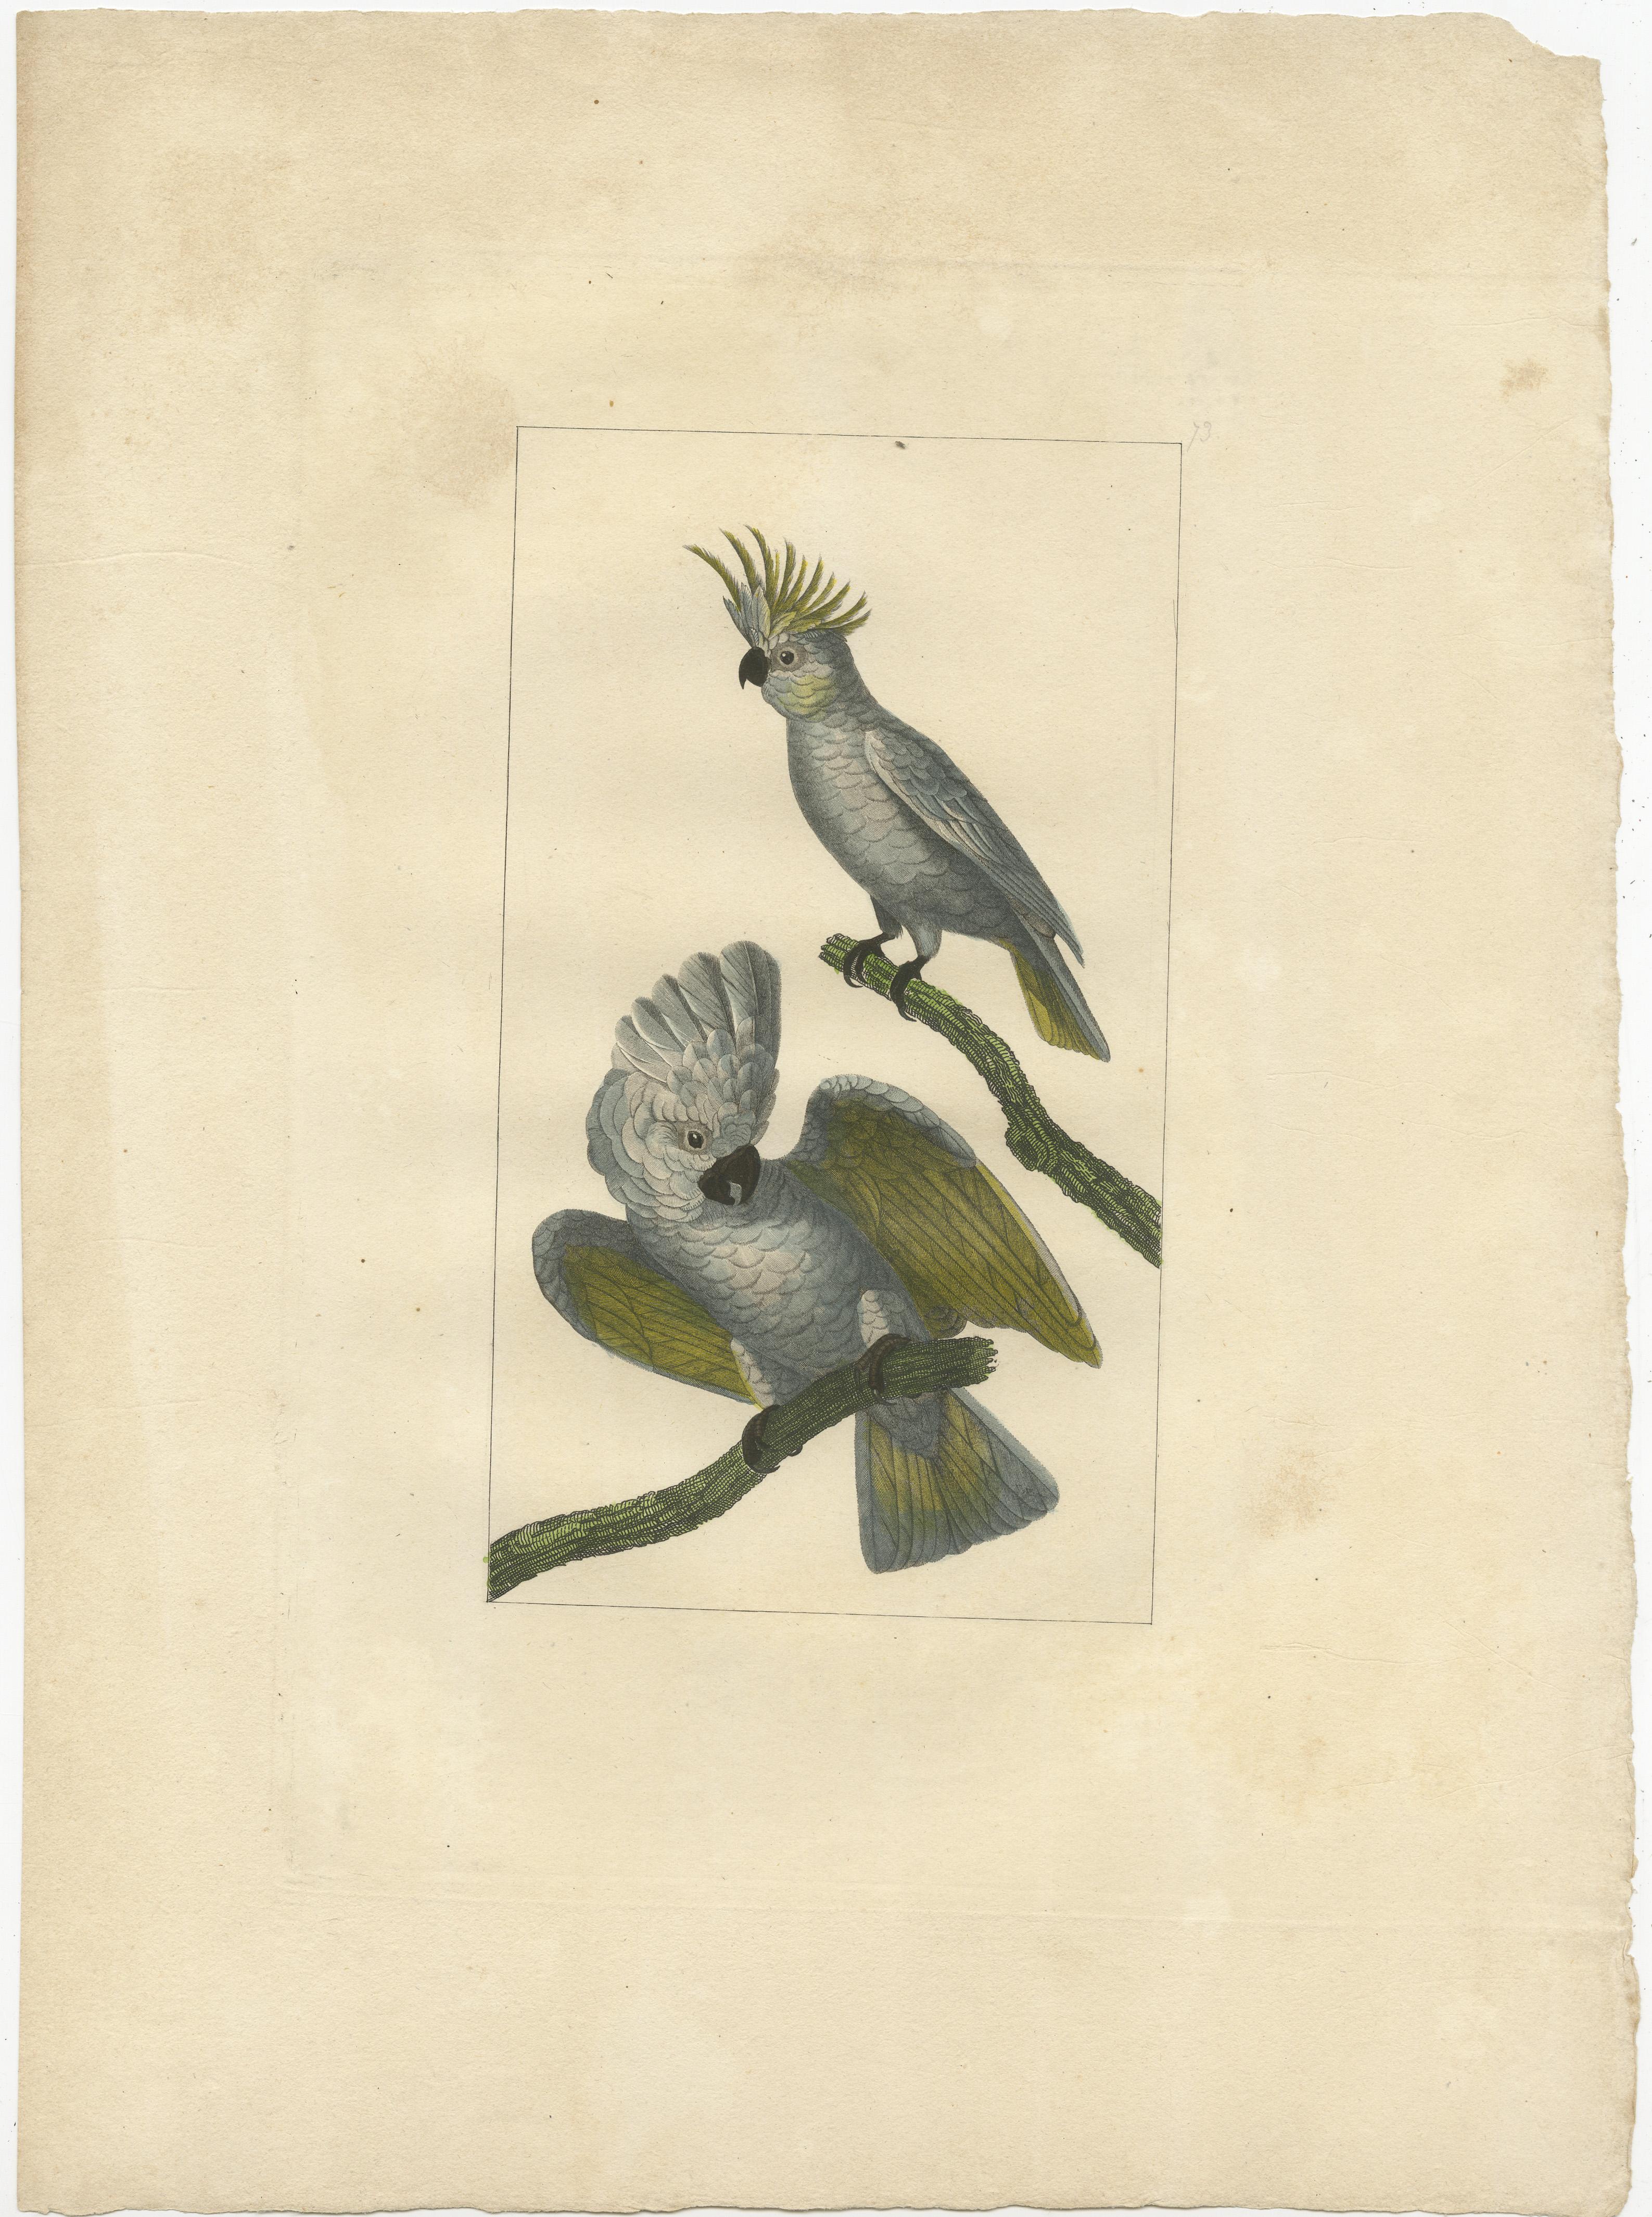 Untitled bird print of cockatoos. Source unknown, to be determined. Published circa 1860.